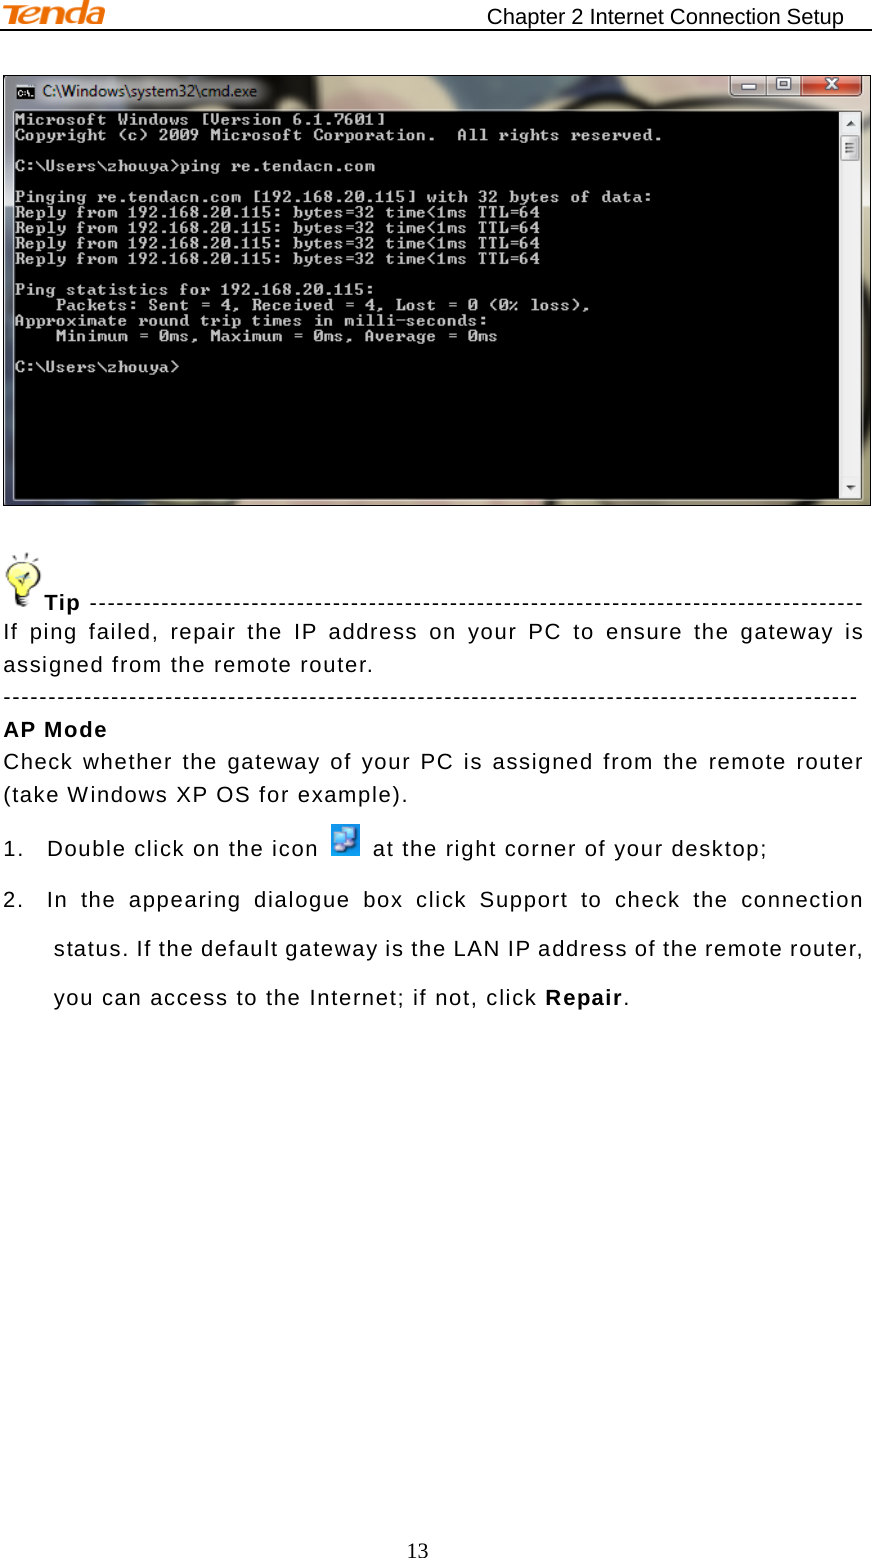                                    Chapter 2 Internet Connection Setup 13    Tip -------------------------------------------------------------------------------------- If ping failed, repair the IP address on your PC to ensure the gateway is assigned from the remote router. ----------------------------------------------------------------------------------------------- AP Mode Check whether the gateway of your PC is assigned from the remote router (take Windows XP OS for example). 1. Double click on the icon   at the right corner of your desktop; 2. In the appearing dialogue box click Support to check the connection status. If the default gateway is the LAN IP address of the remote router, you can access to the Internet; if not, click Repair.  